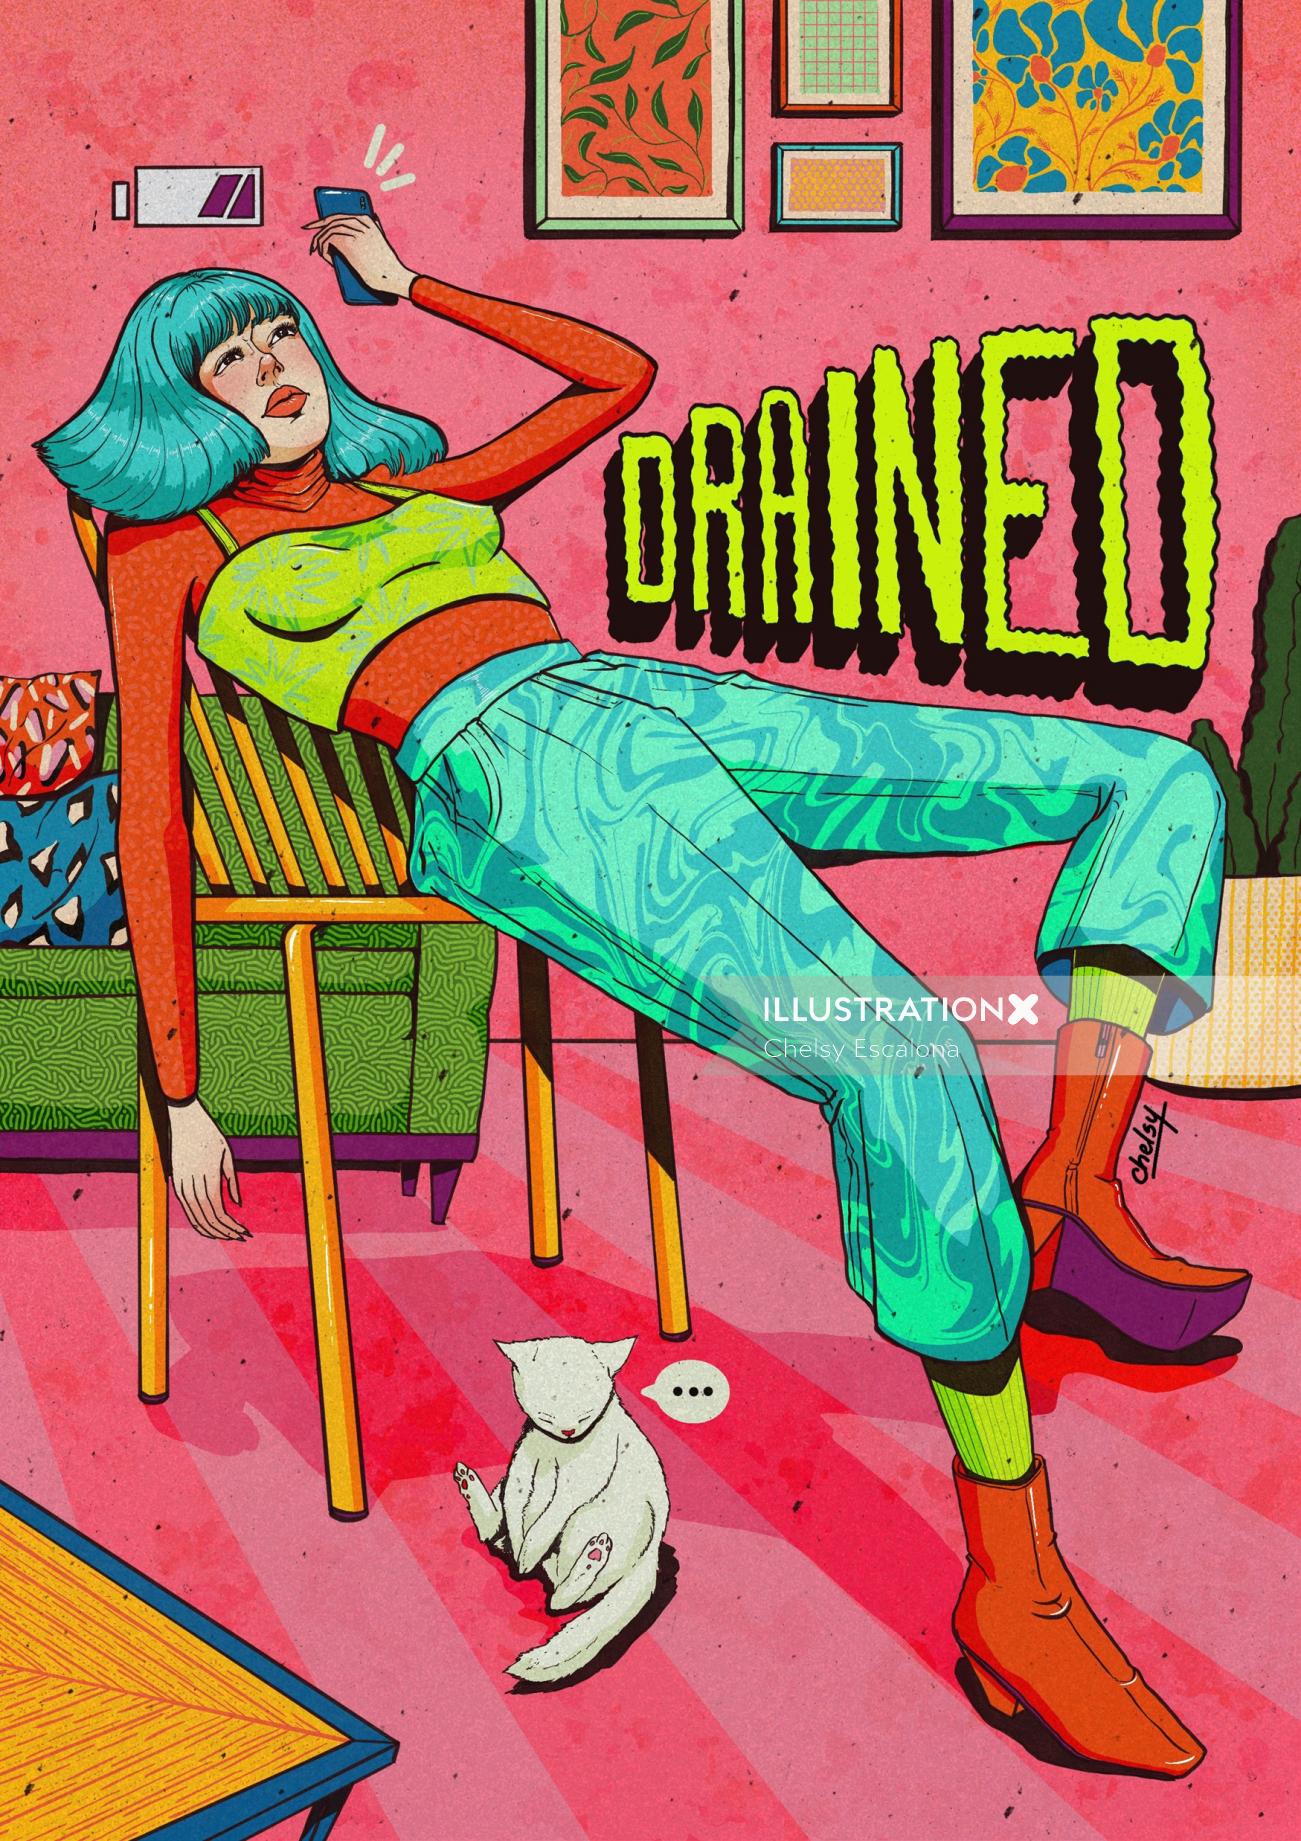 Book cover illustration of "Drained", 2022